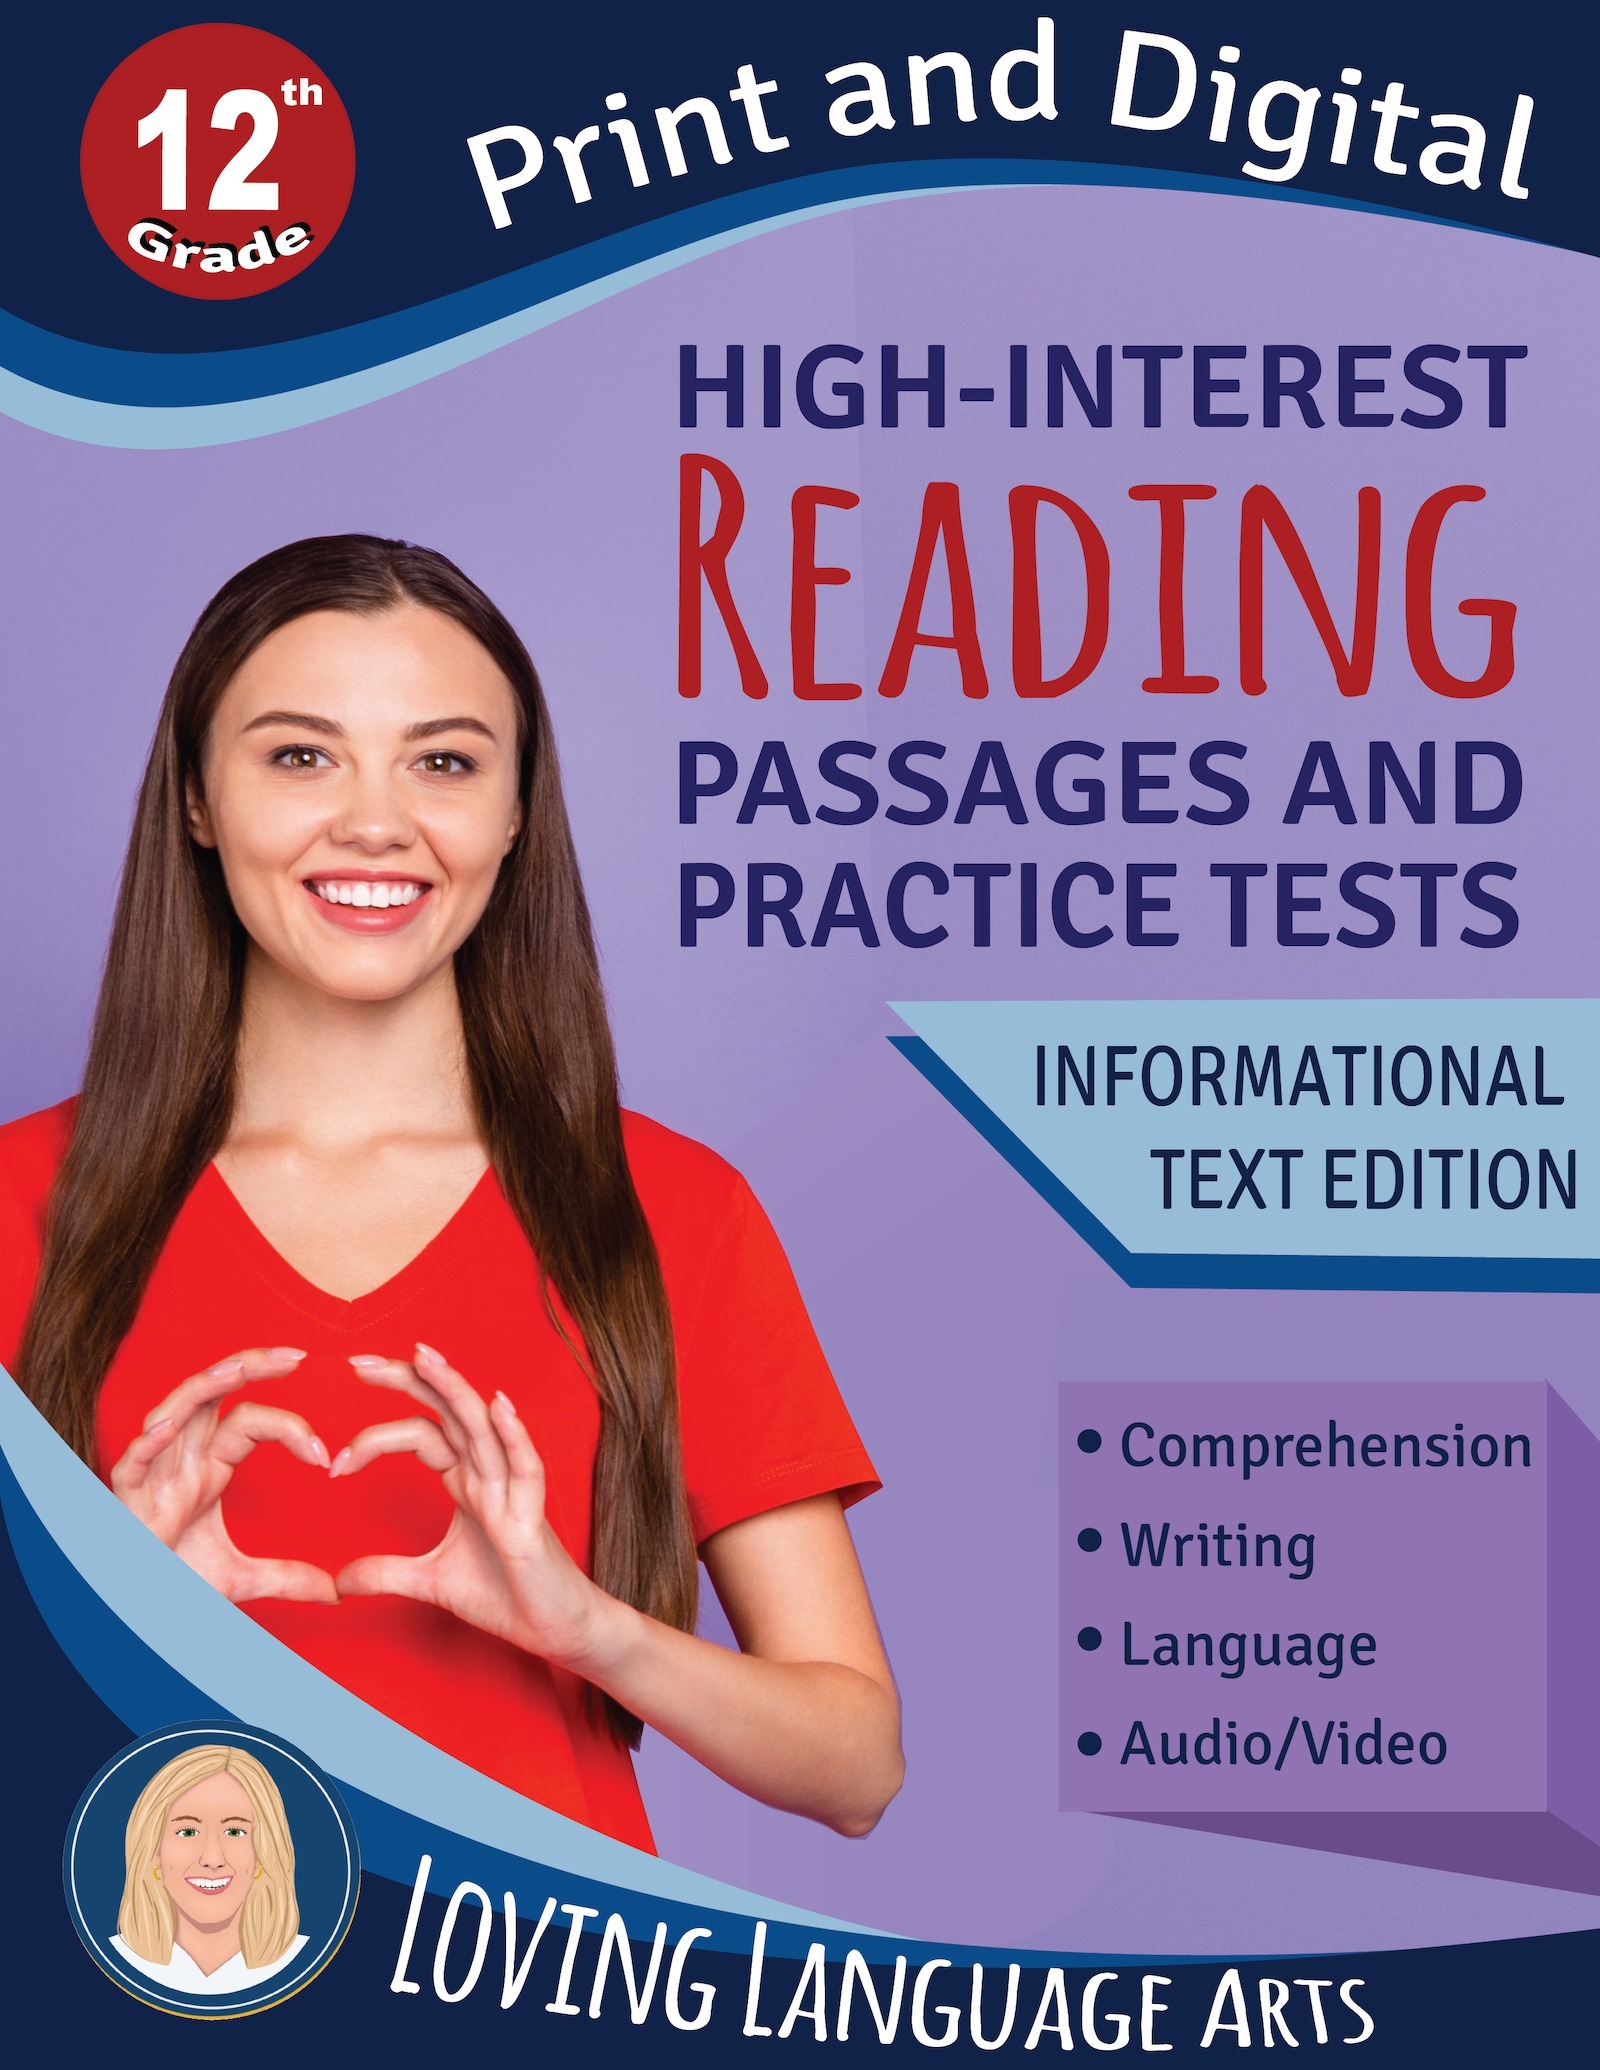 Grade 12 Reading Passages and Practice Tests Workbook - Informational Text Edition